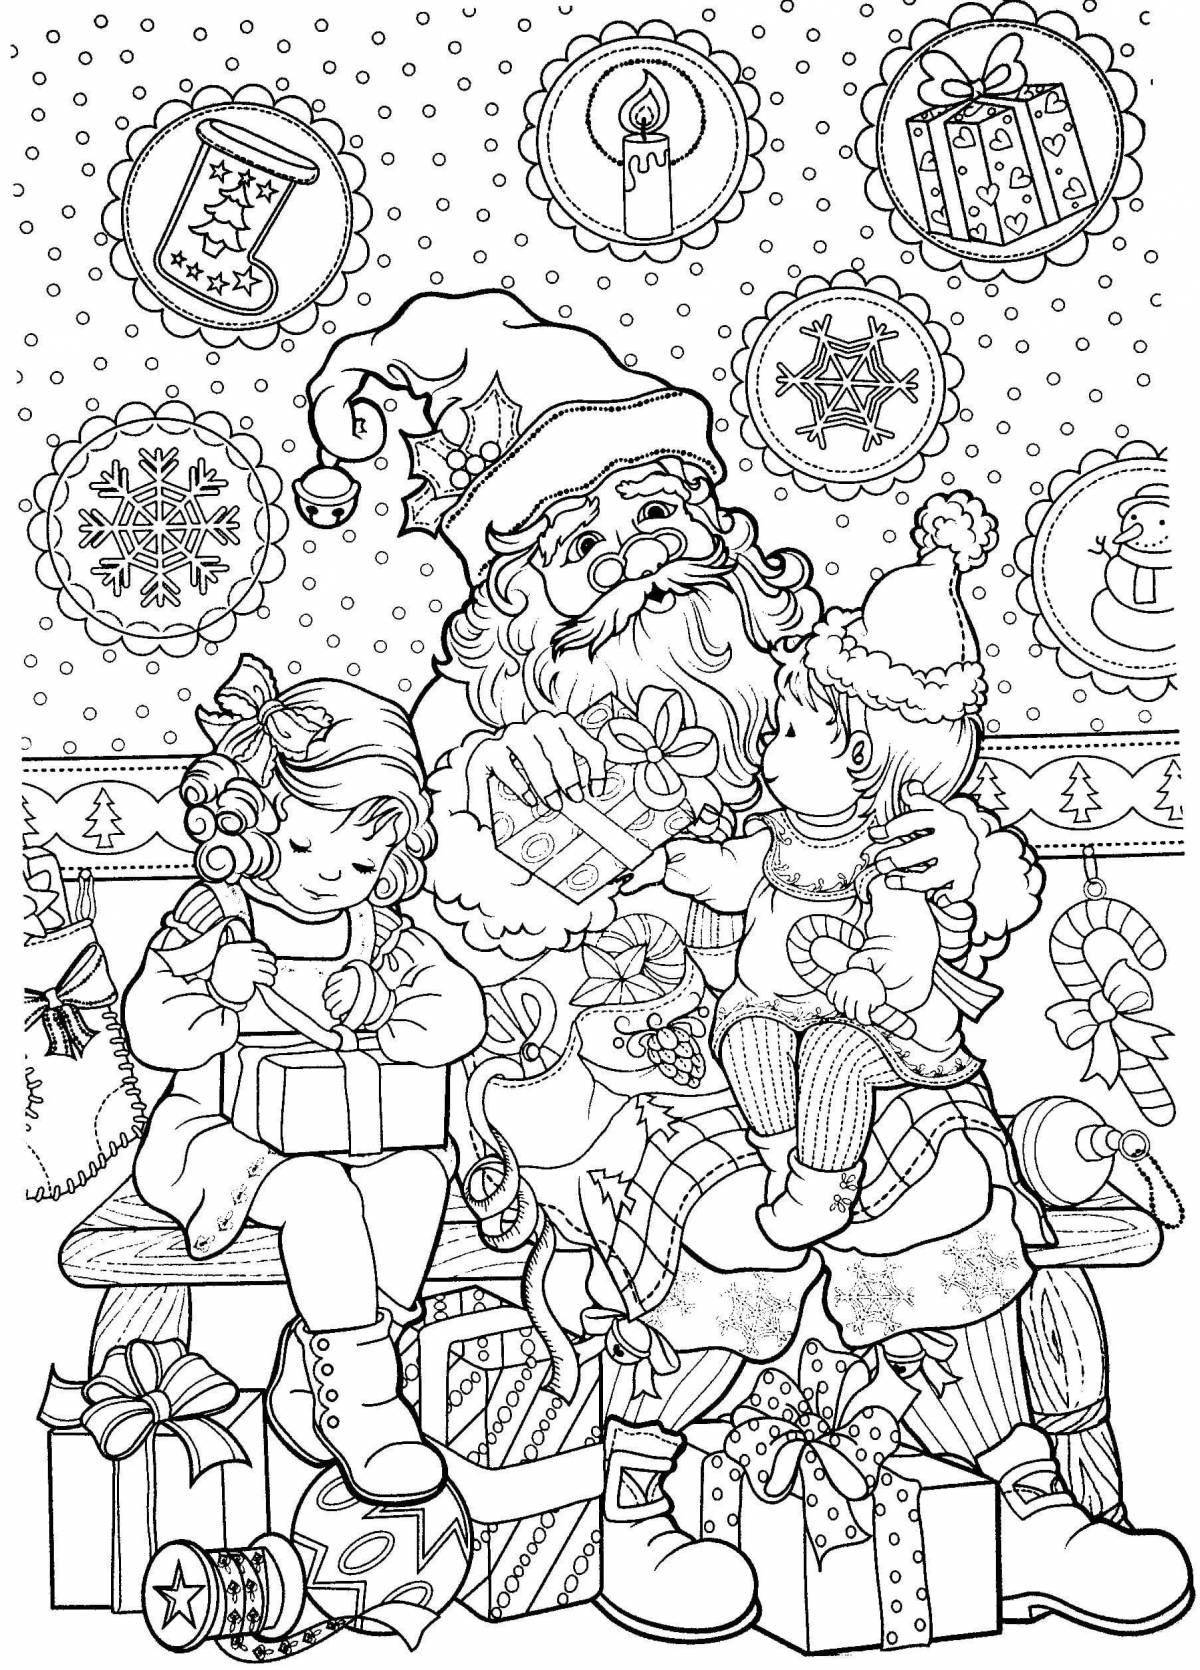 Great Christmas coloring book for adults